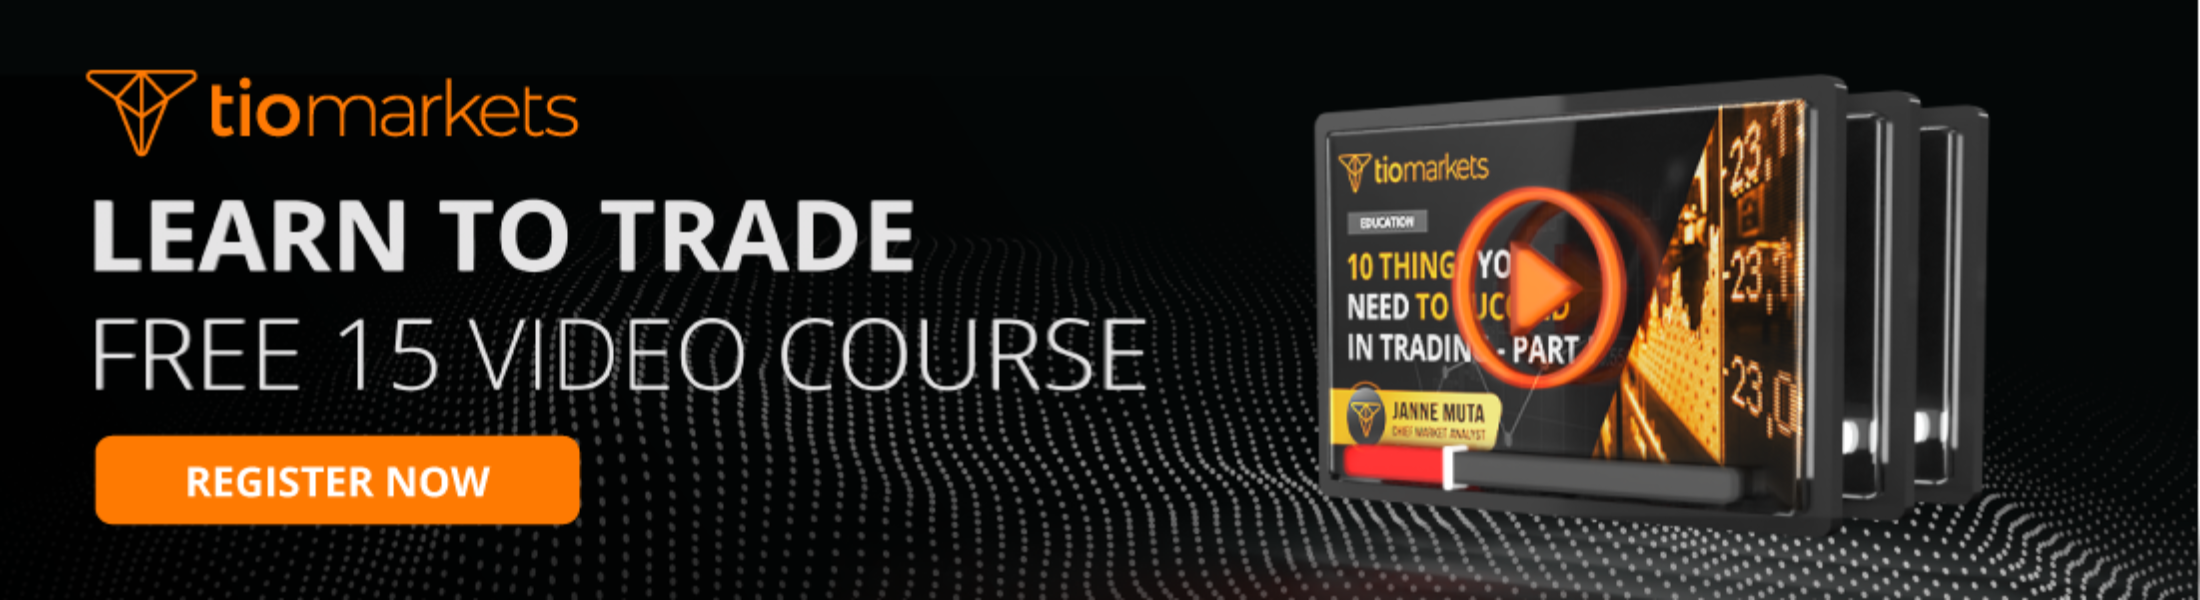 Learn to trade banner